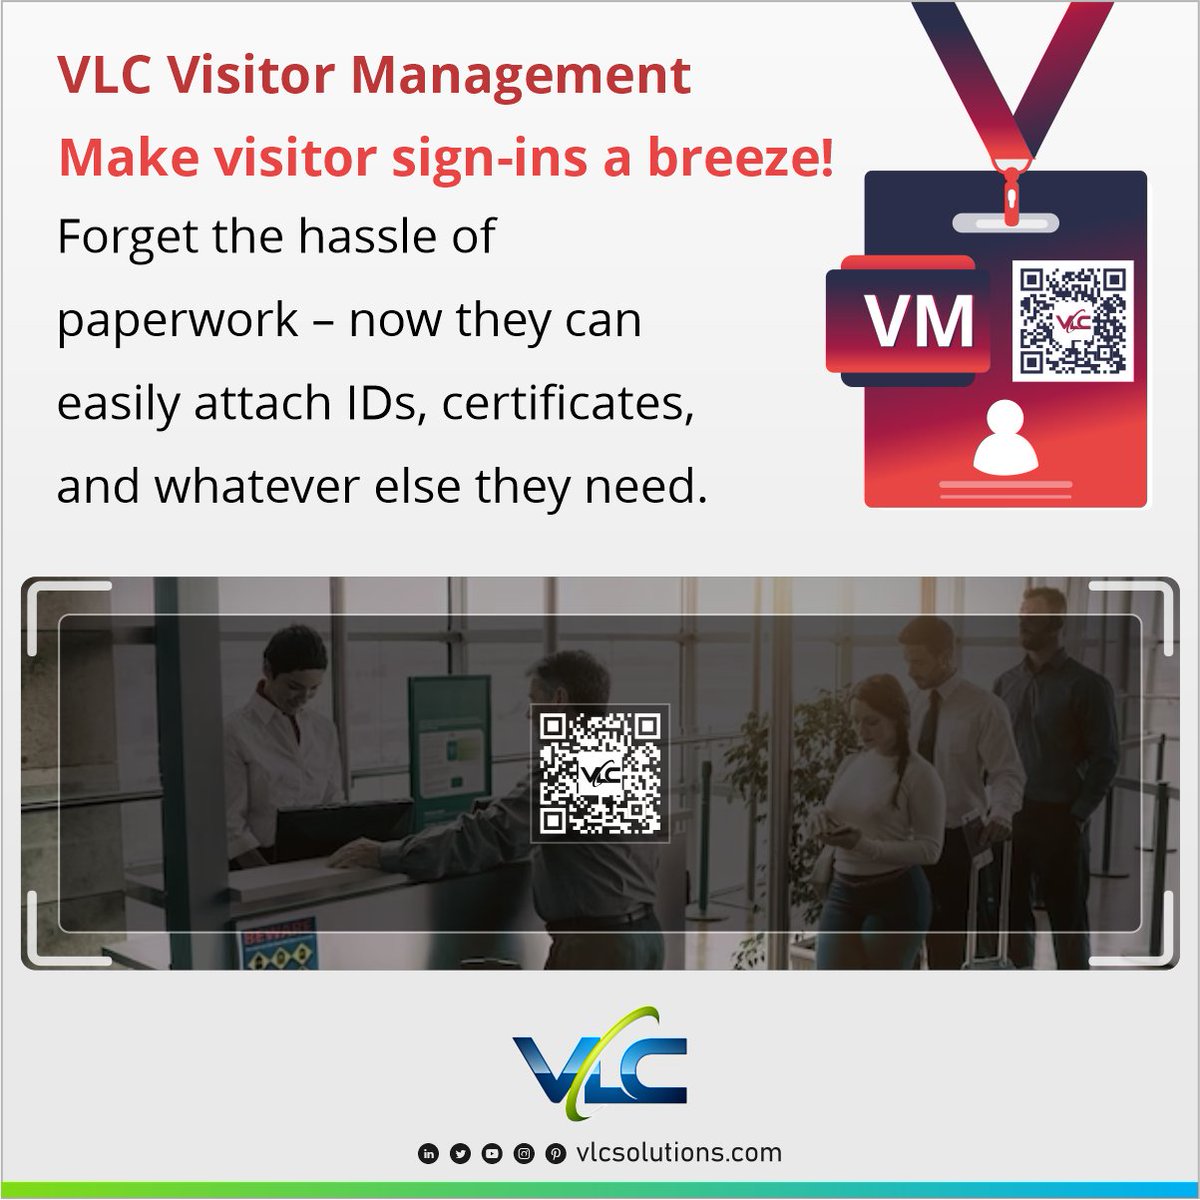 Simplify visitor check-ins effortlessly with VLC Visitor Management! Allow them to easily attach IDs, and certificates, and more hassle-free. Keeping it straightforward and stress-free. vlcsolutions.com/visitor-manage… #CheckInSimplicity #EffortlessAttachments